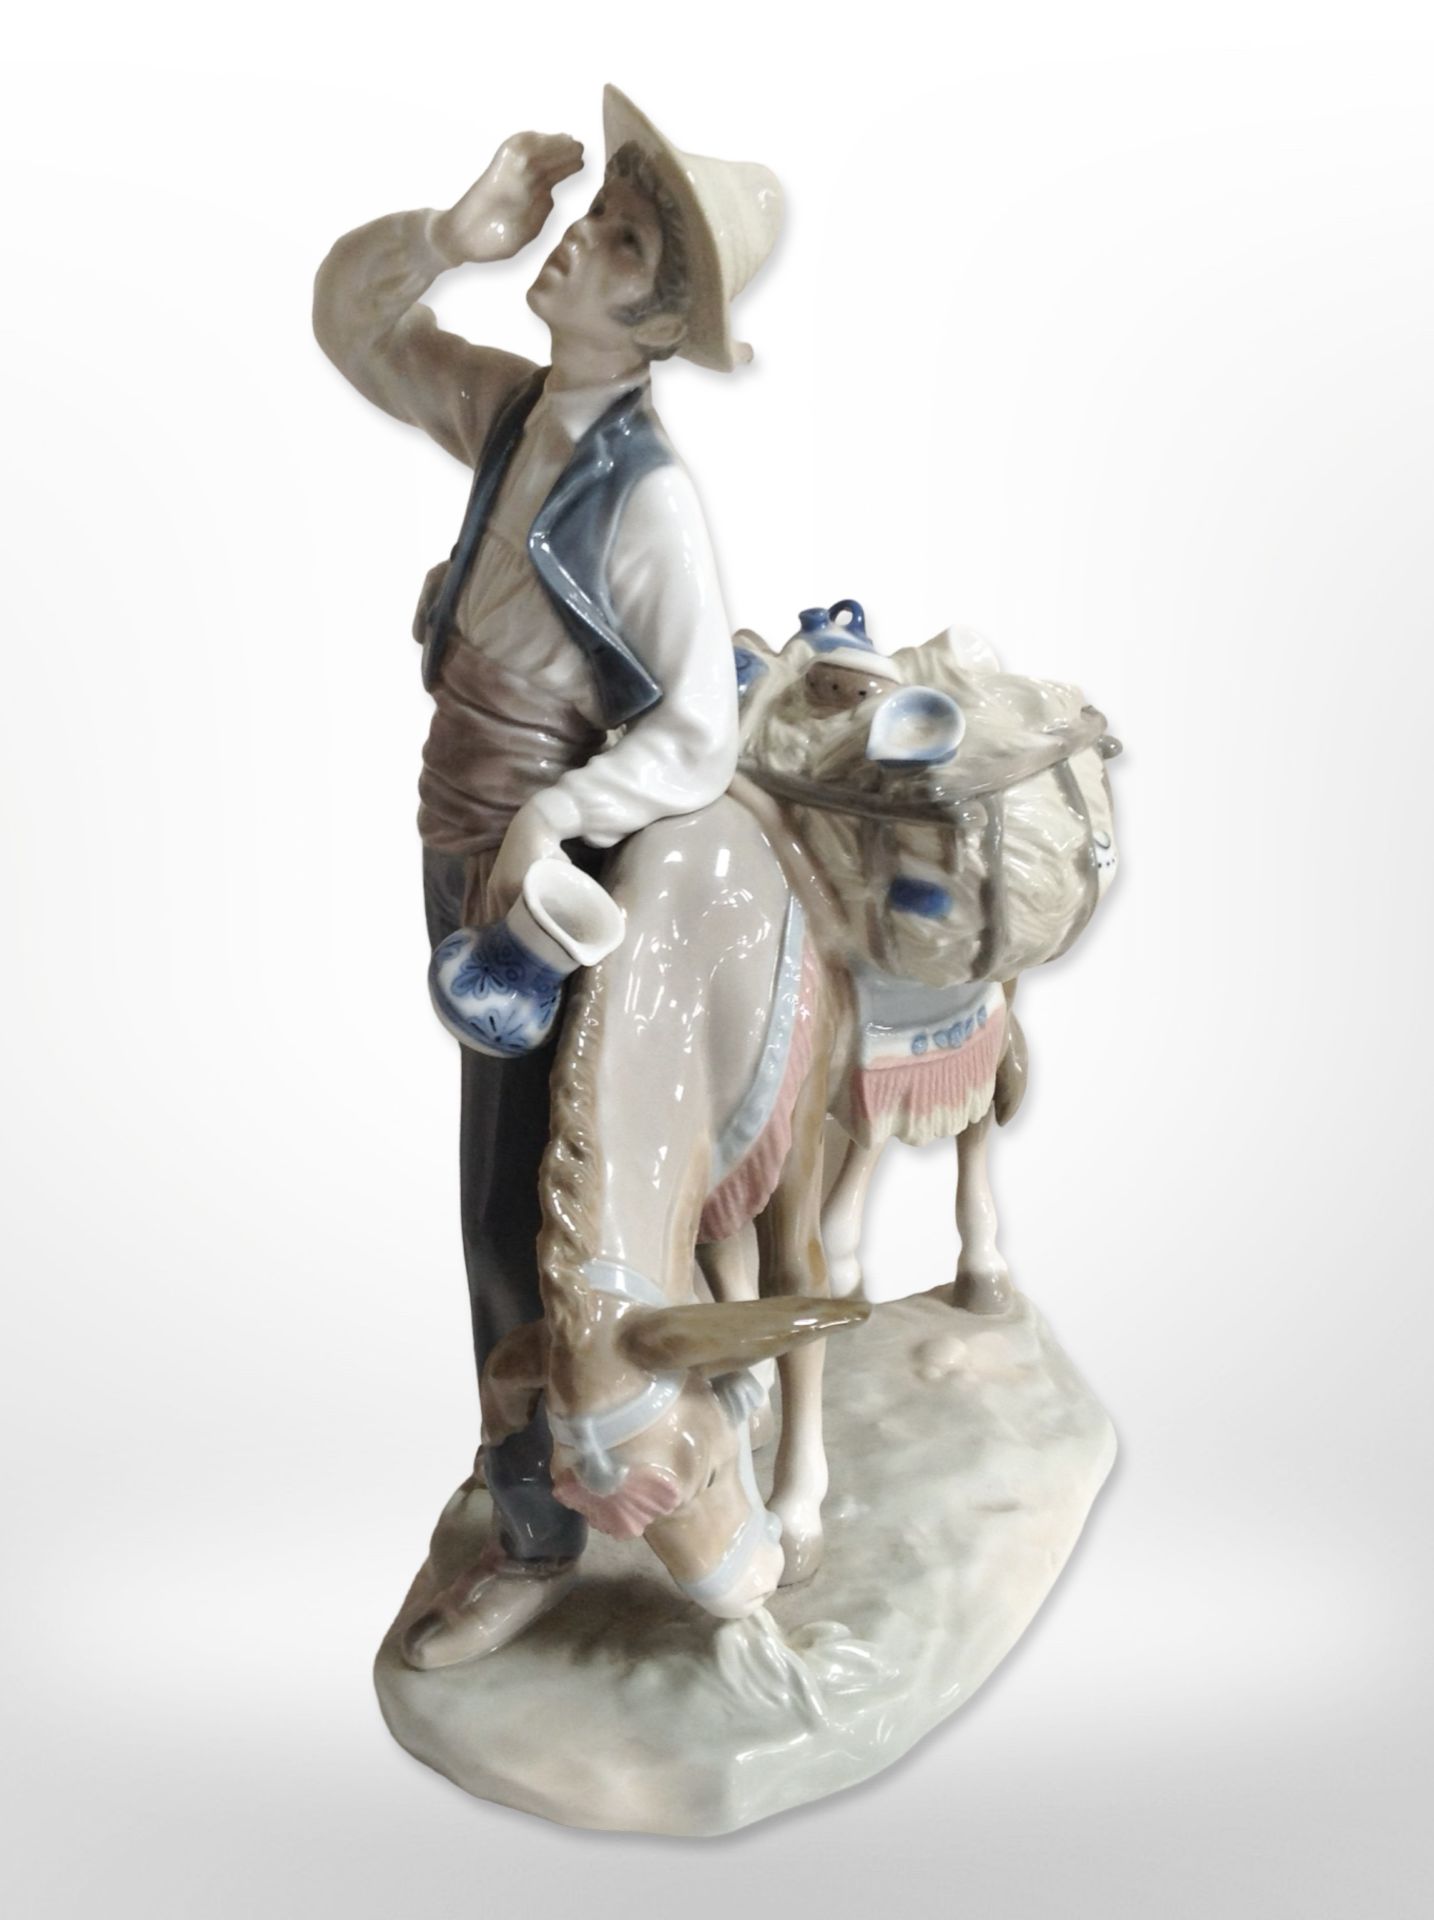 A Lladró figure of a man with a mule carrying goods.